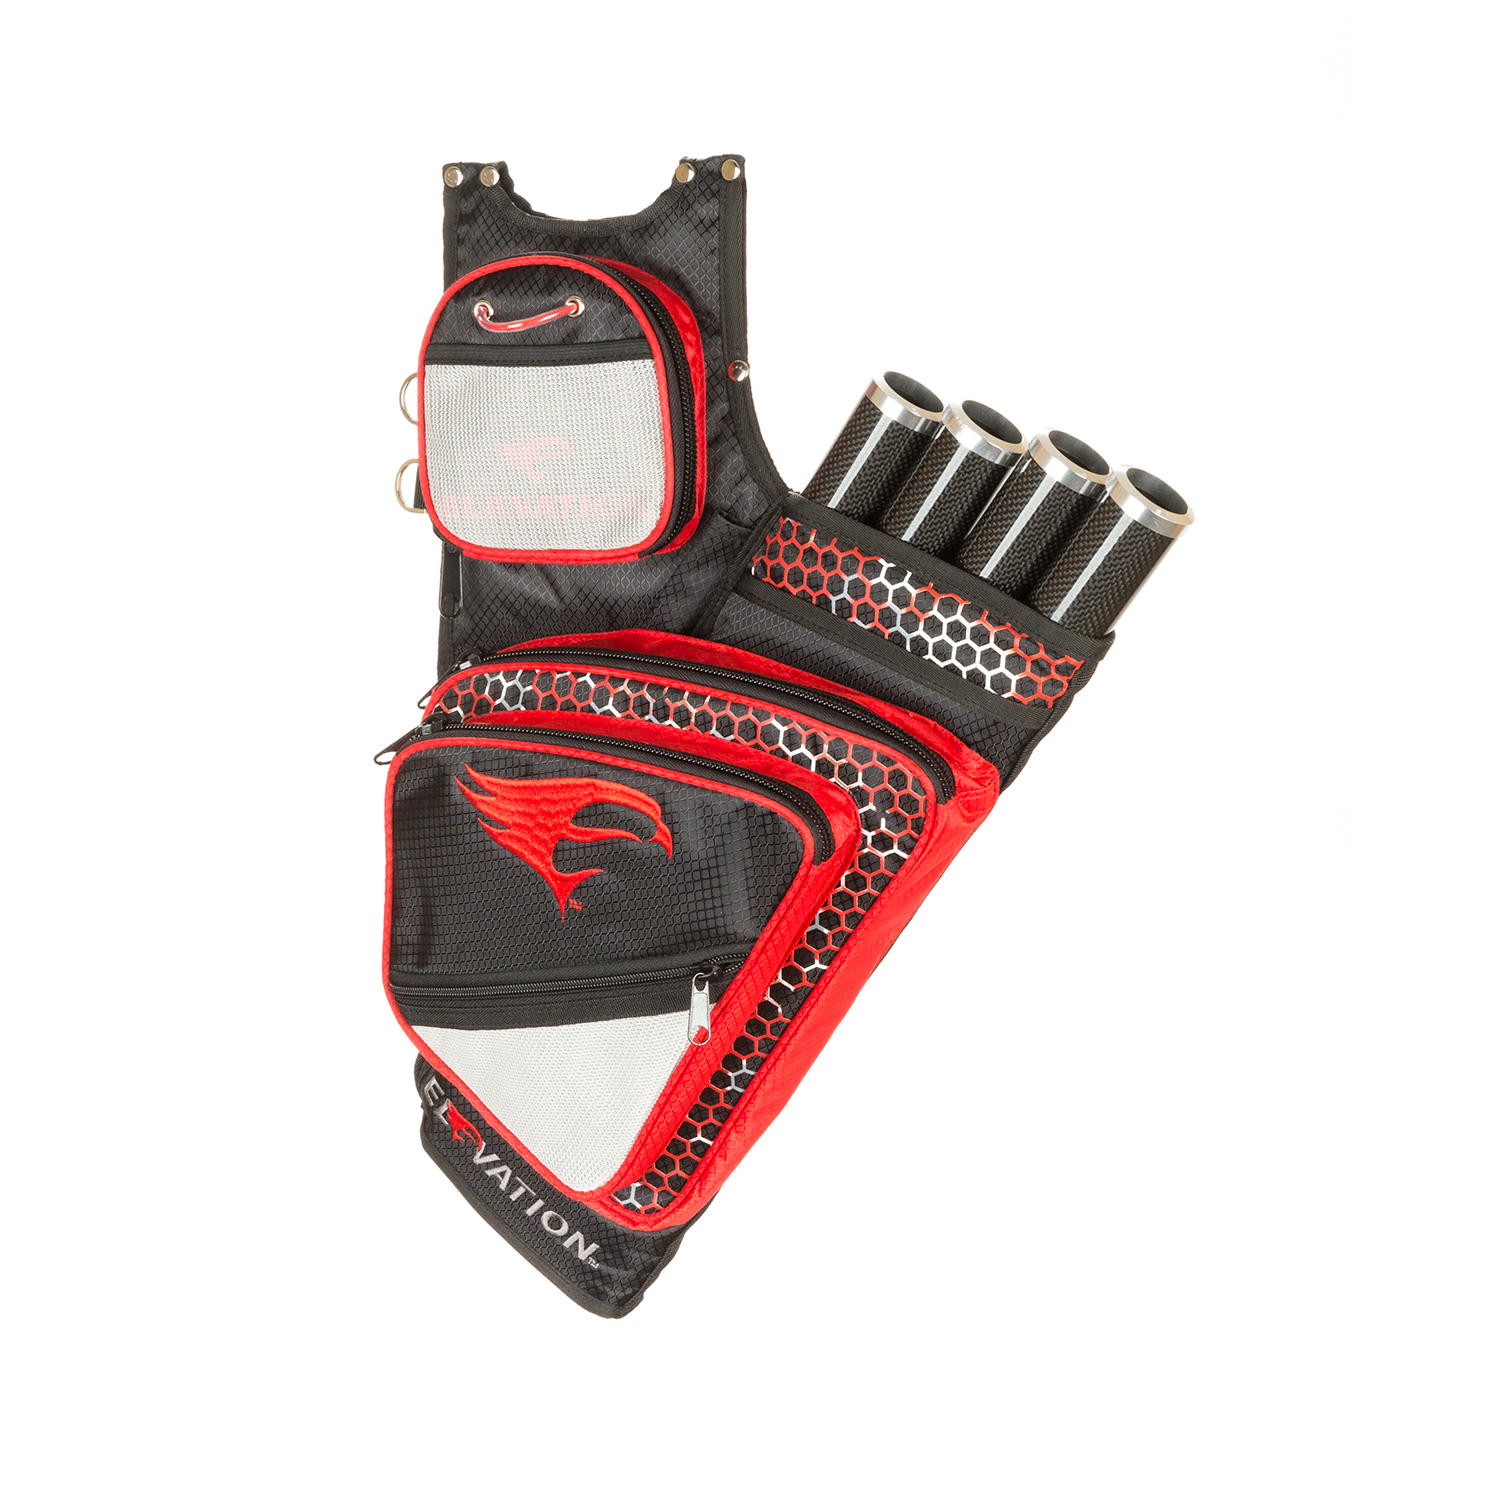 Elevation Adrenalin Quiver Black/Red 4 Tube Right Hand 